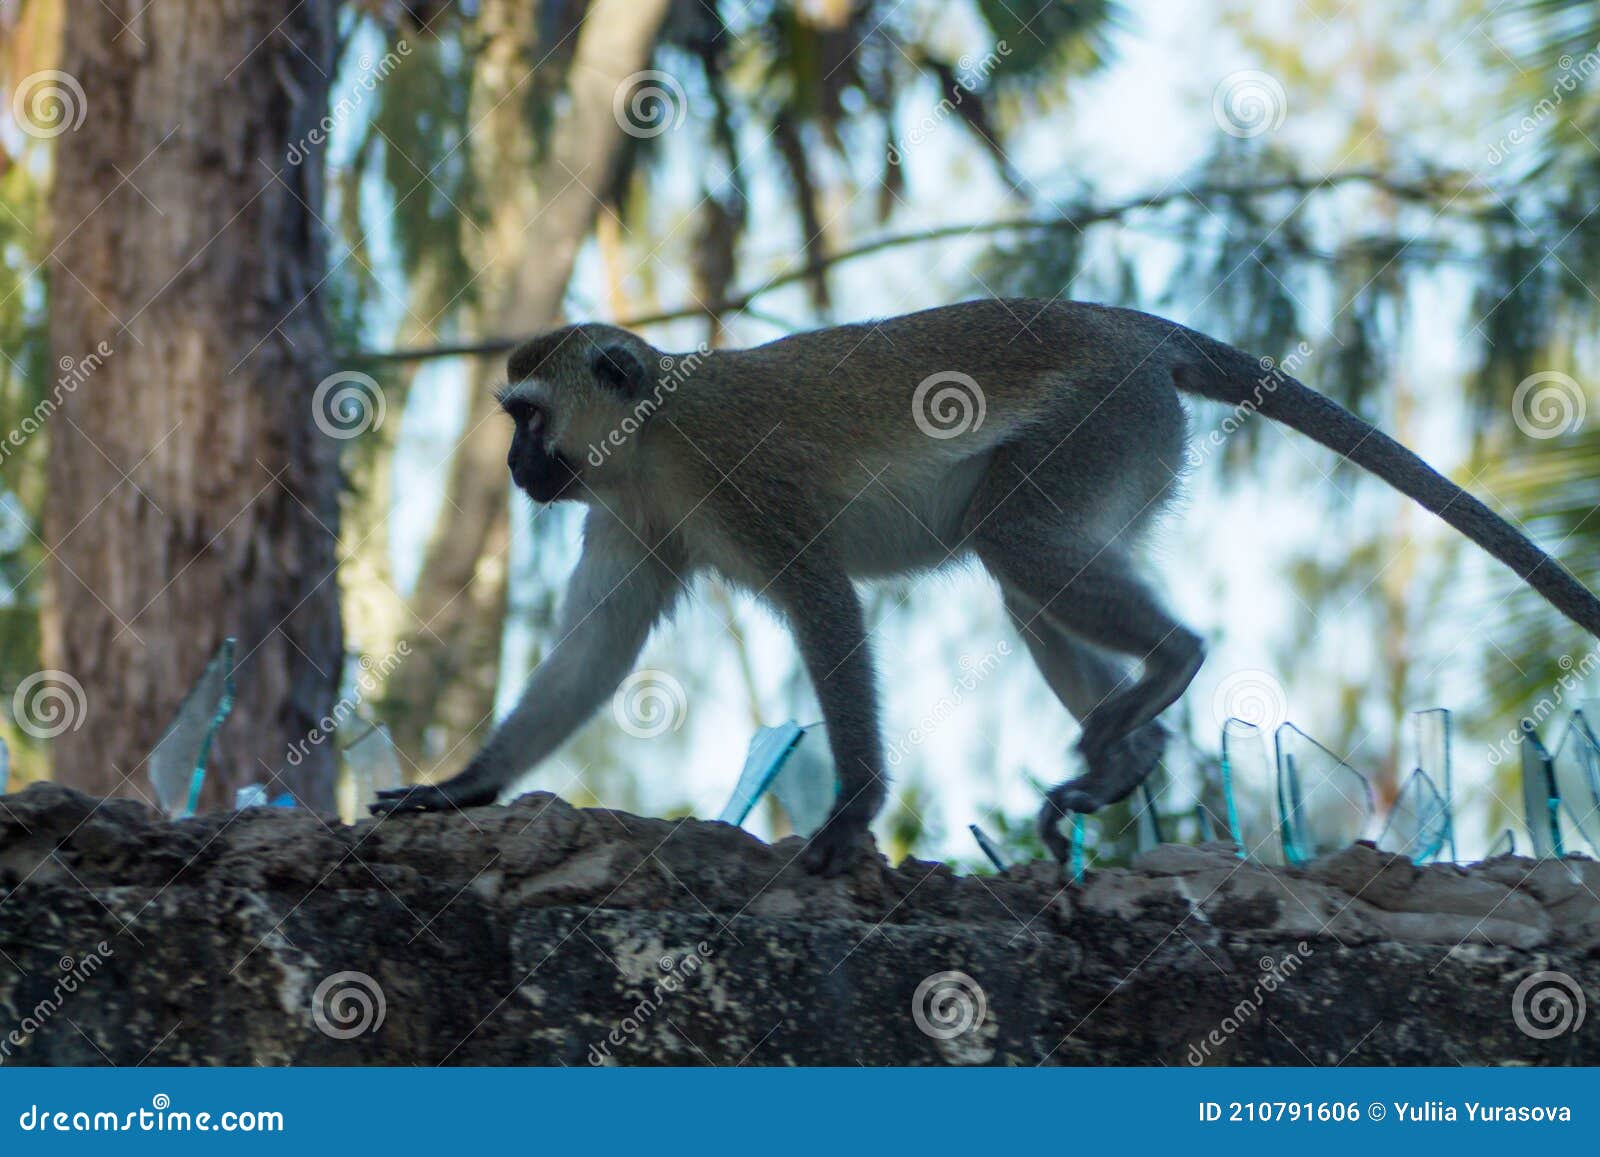 monkey in the city climbing on a wall